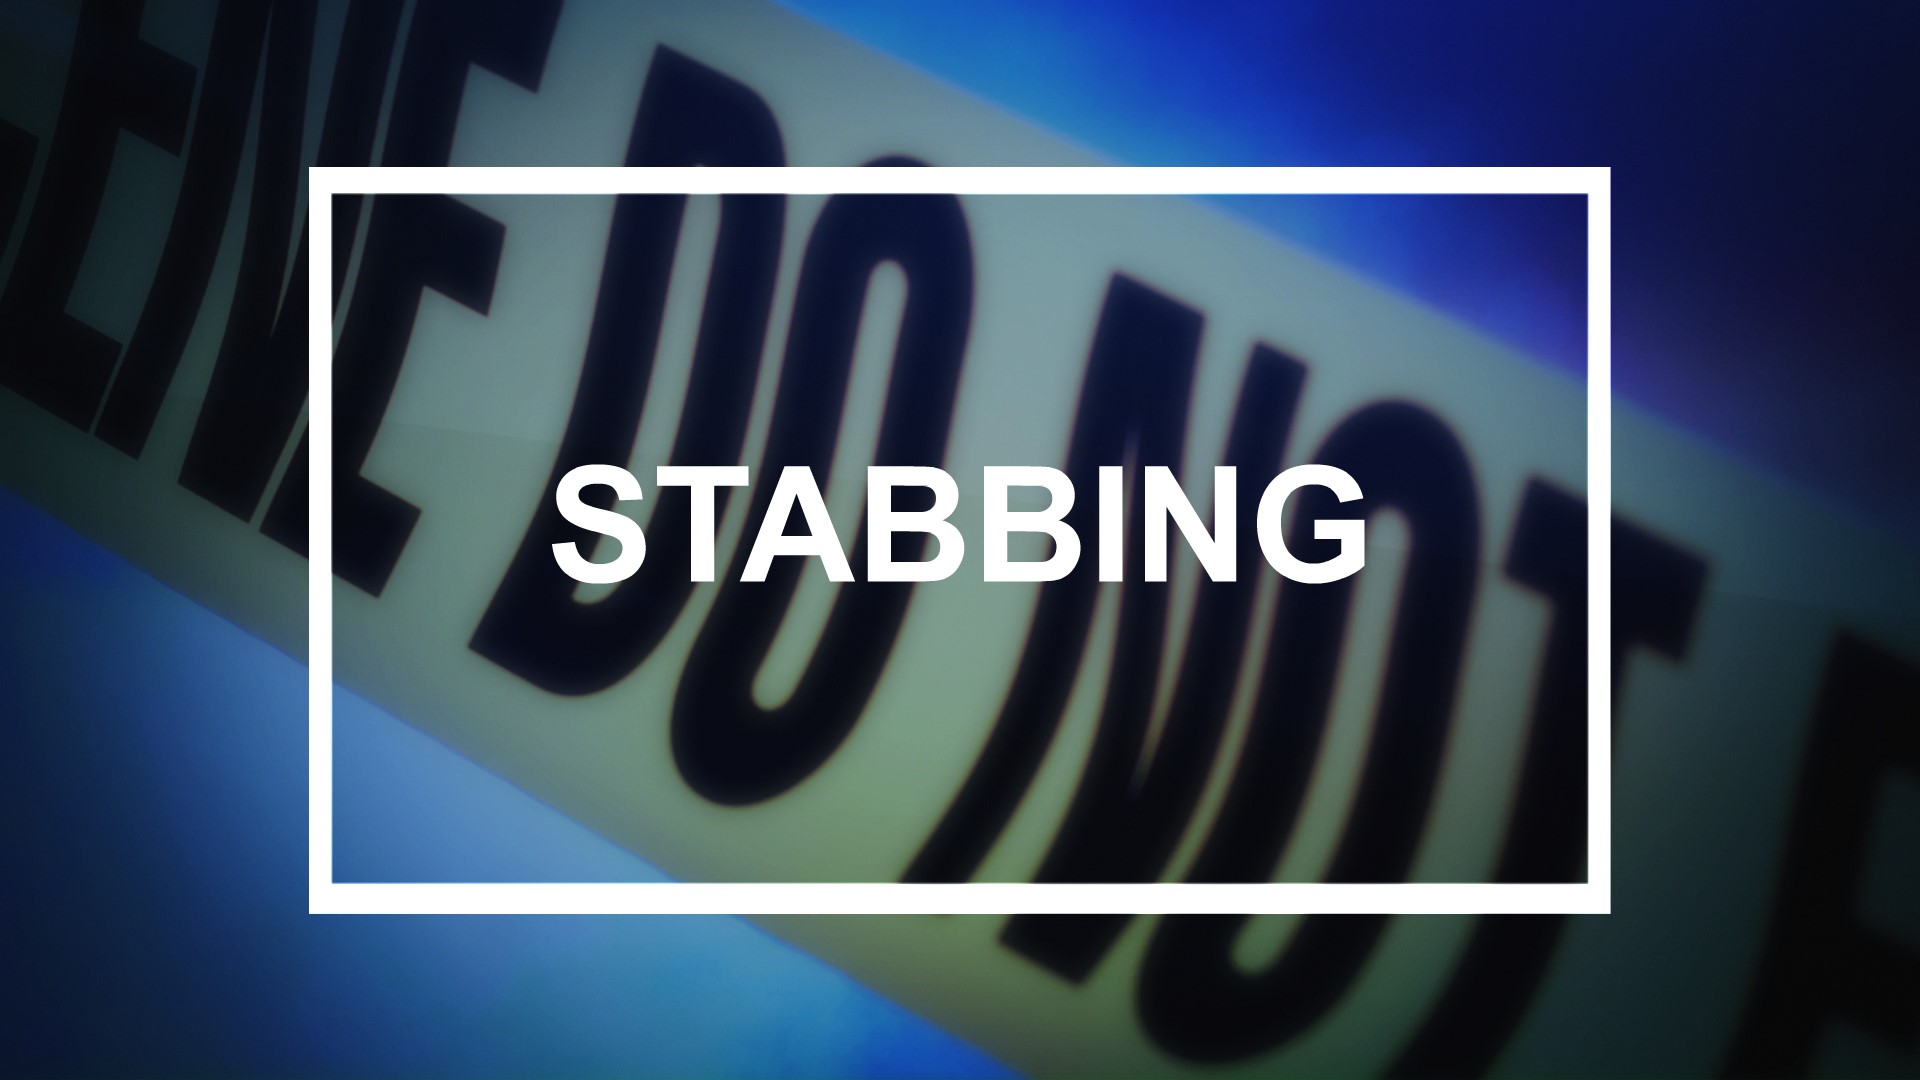 Police say the stabbing happened on Saturday evening in Ridgebury Township.